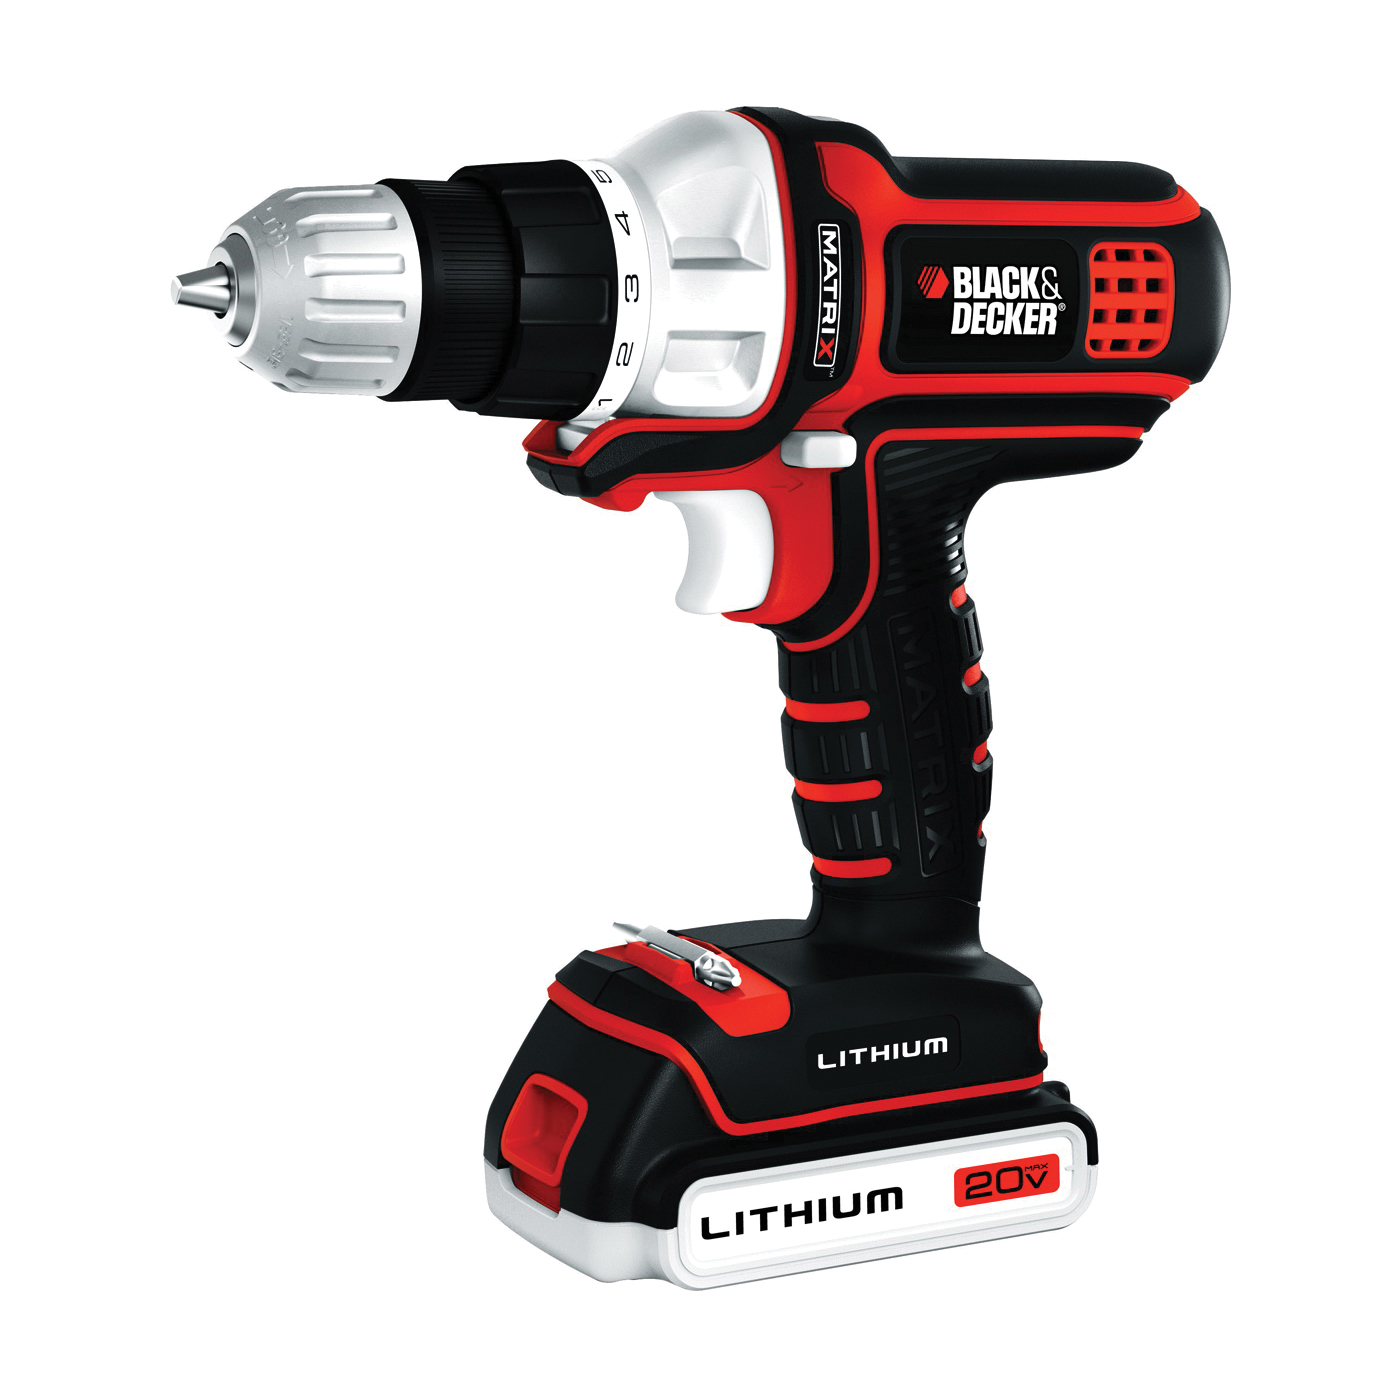 Black and Decker 20 Volt Lithium Drill Review 